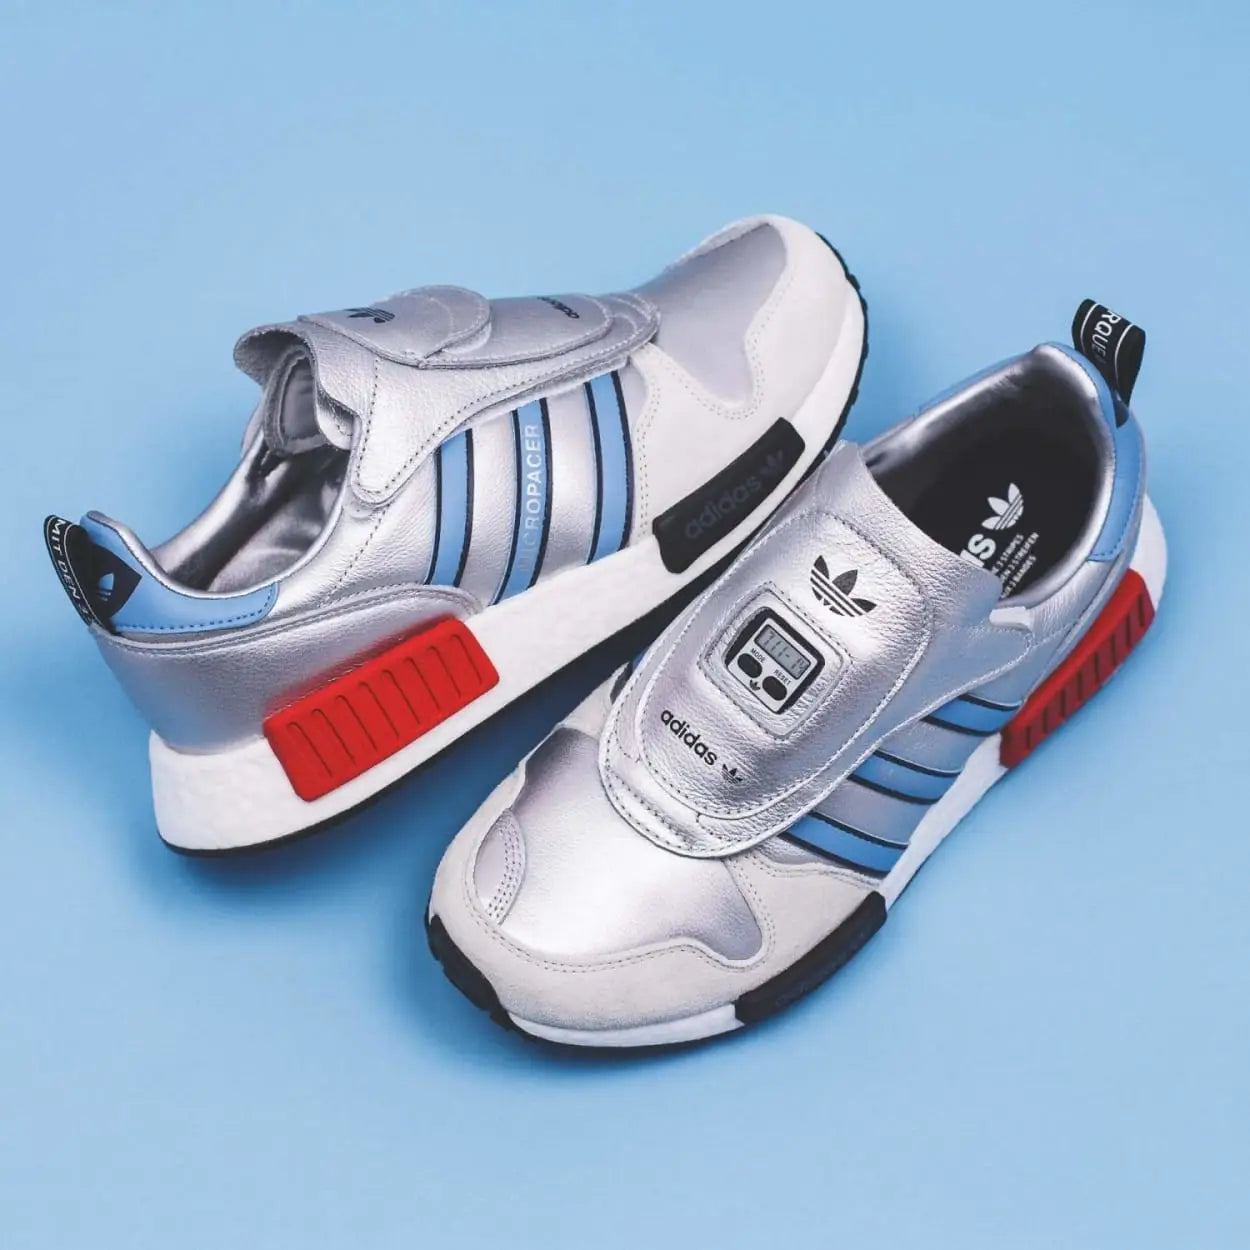 adidas Originals Never Made Pack - Micro Pacer x NMD R1 (G26778) adidas 98 x Boost-You-Wear (G26807) Country x Kamanda (G26797) ZX 930 x EQT